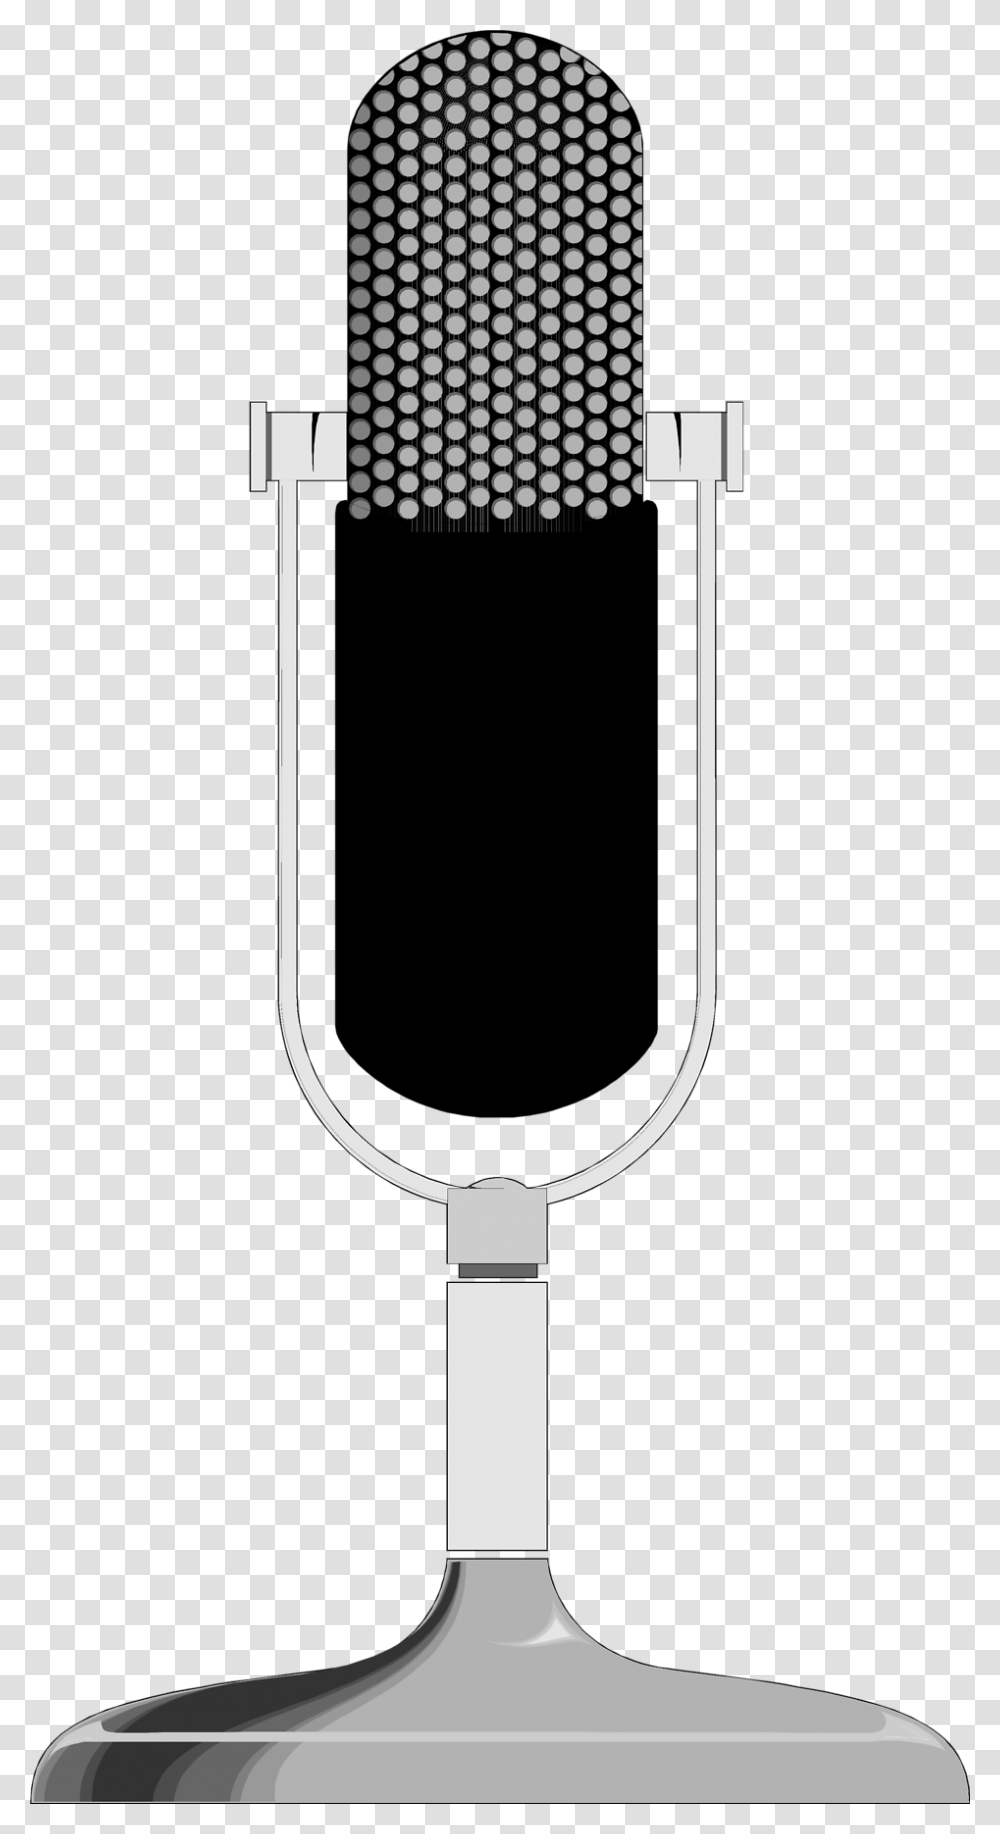 Free Stock Photo Illustration Of A Rap Microphone Drawing Background, Lamp, Electrical Device, Security, Armor Transparent Png